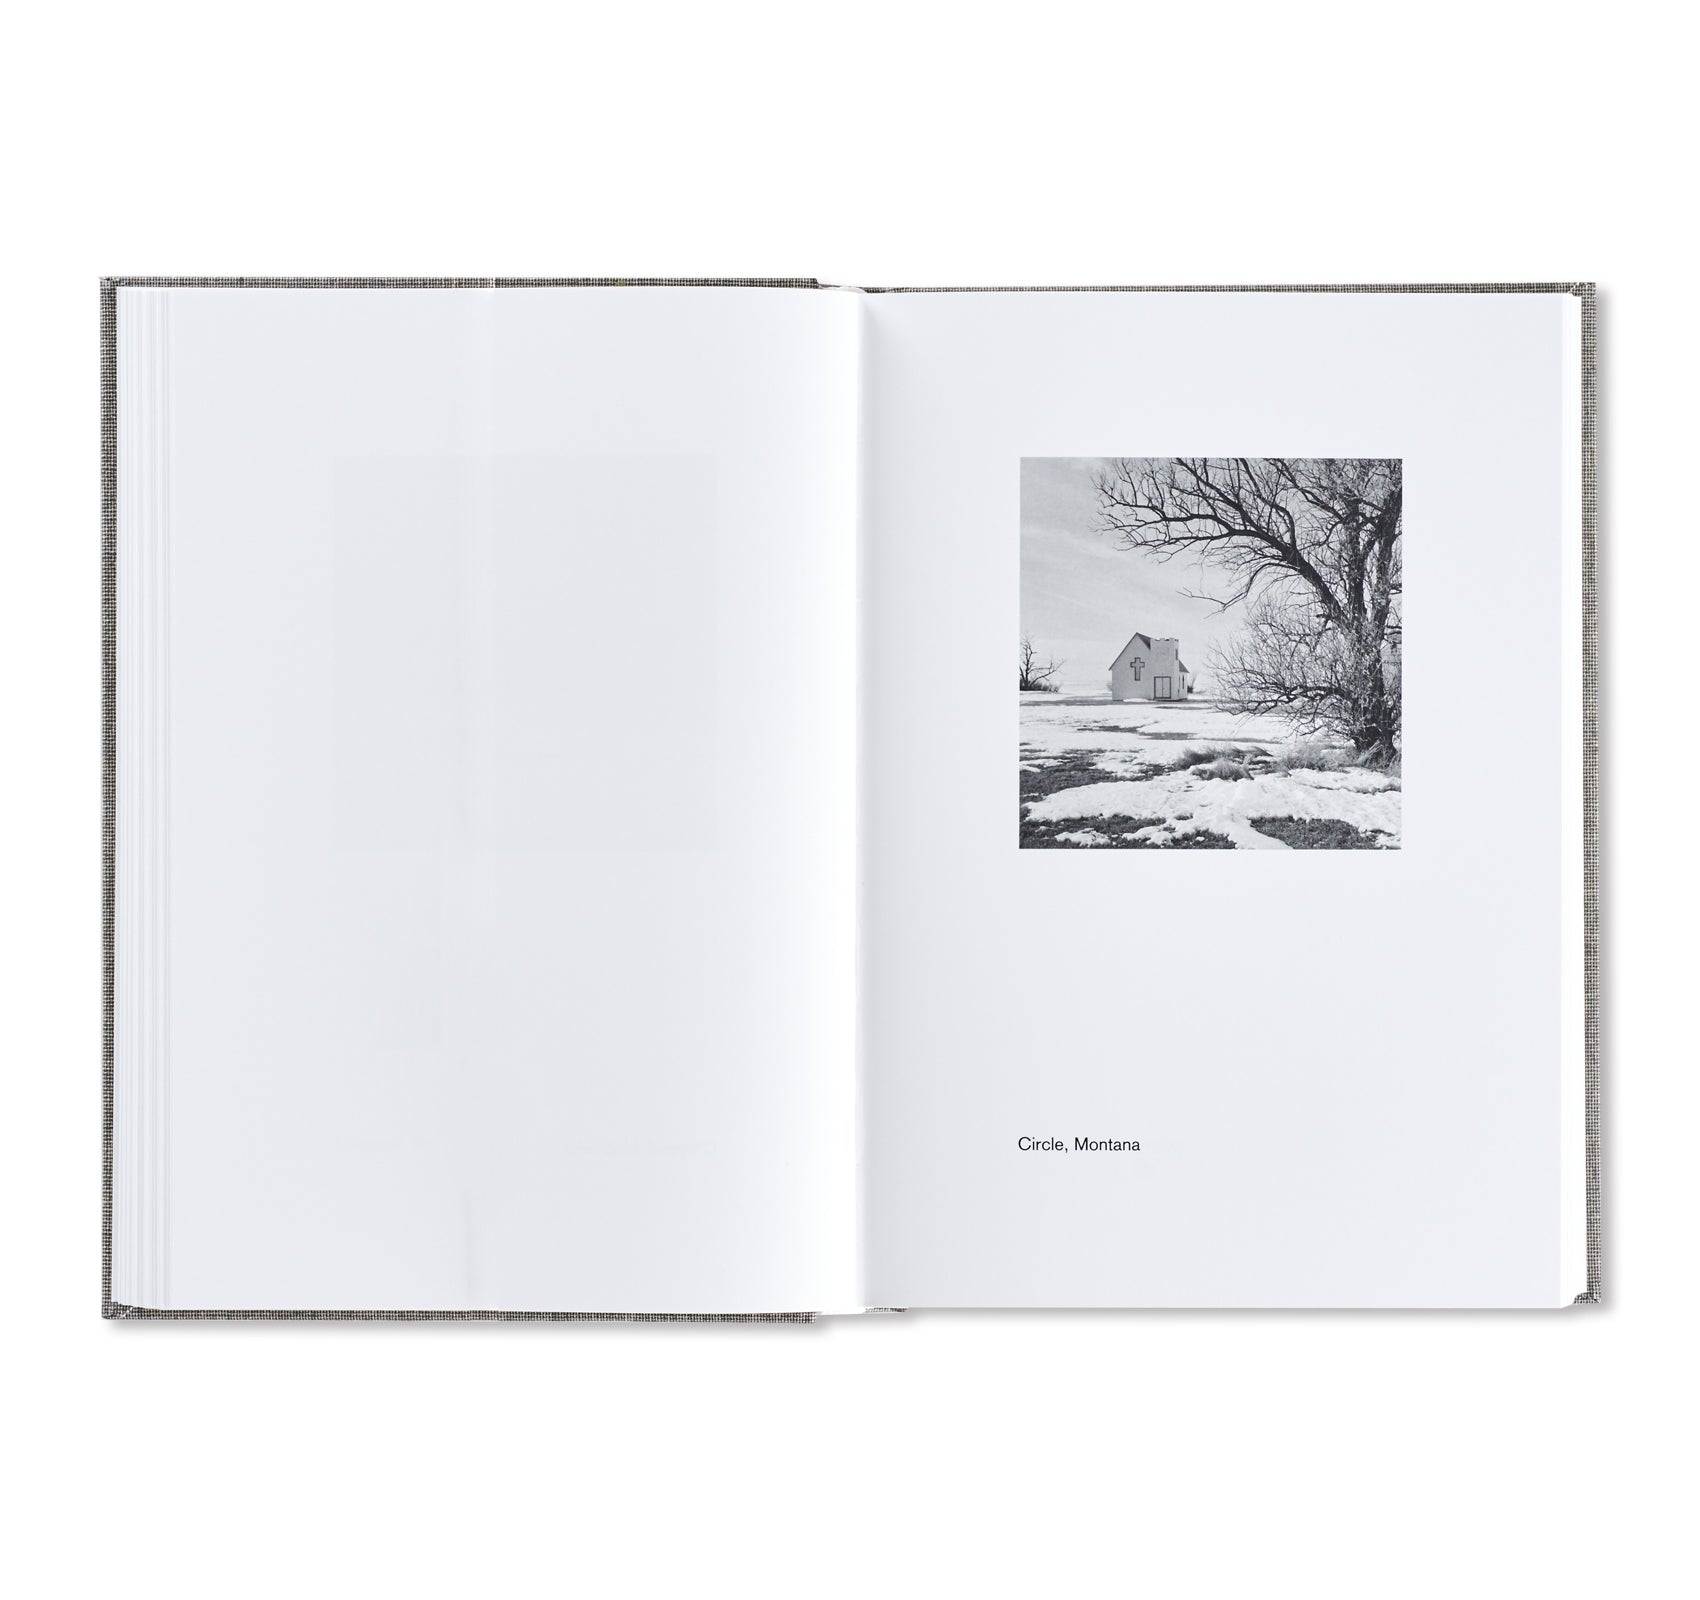 AMERICAN WINTER by Gerry Johansson [SIGNED]